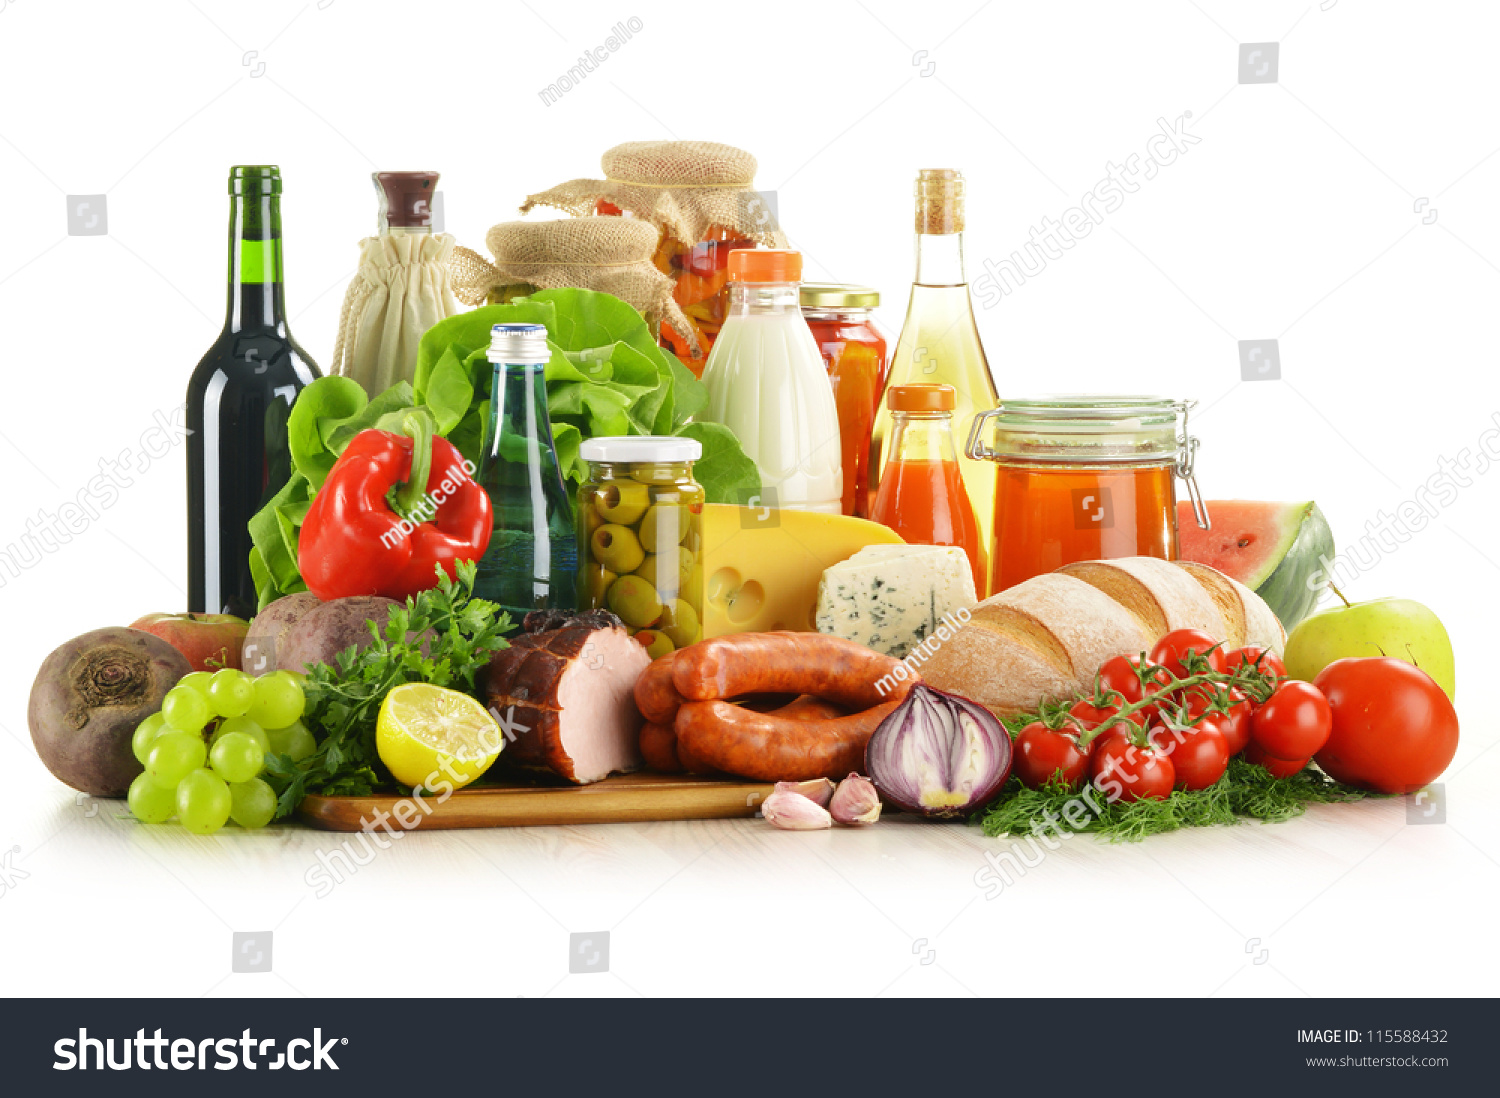 Composition with variety of grocery products including vegetables, fruits, meat, dairy and wine #115588432